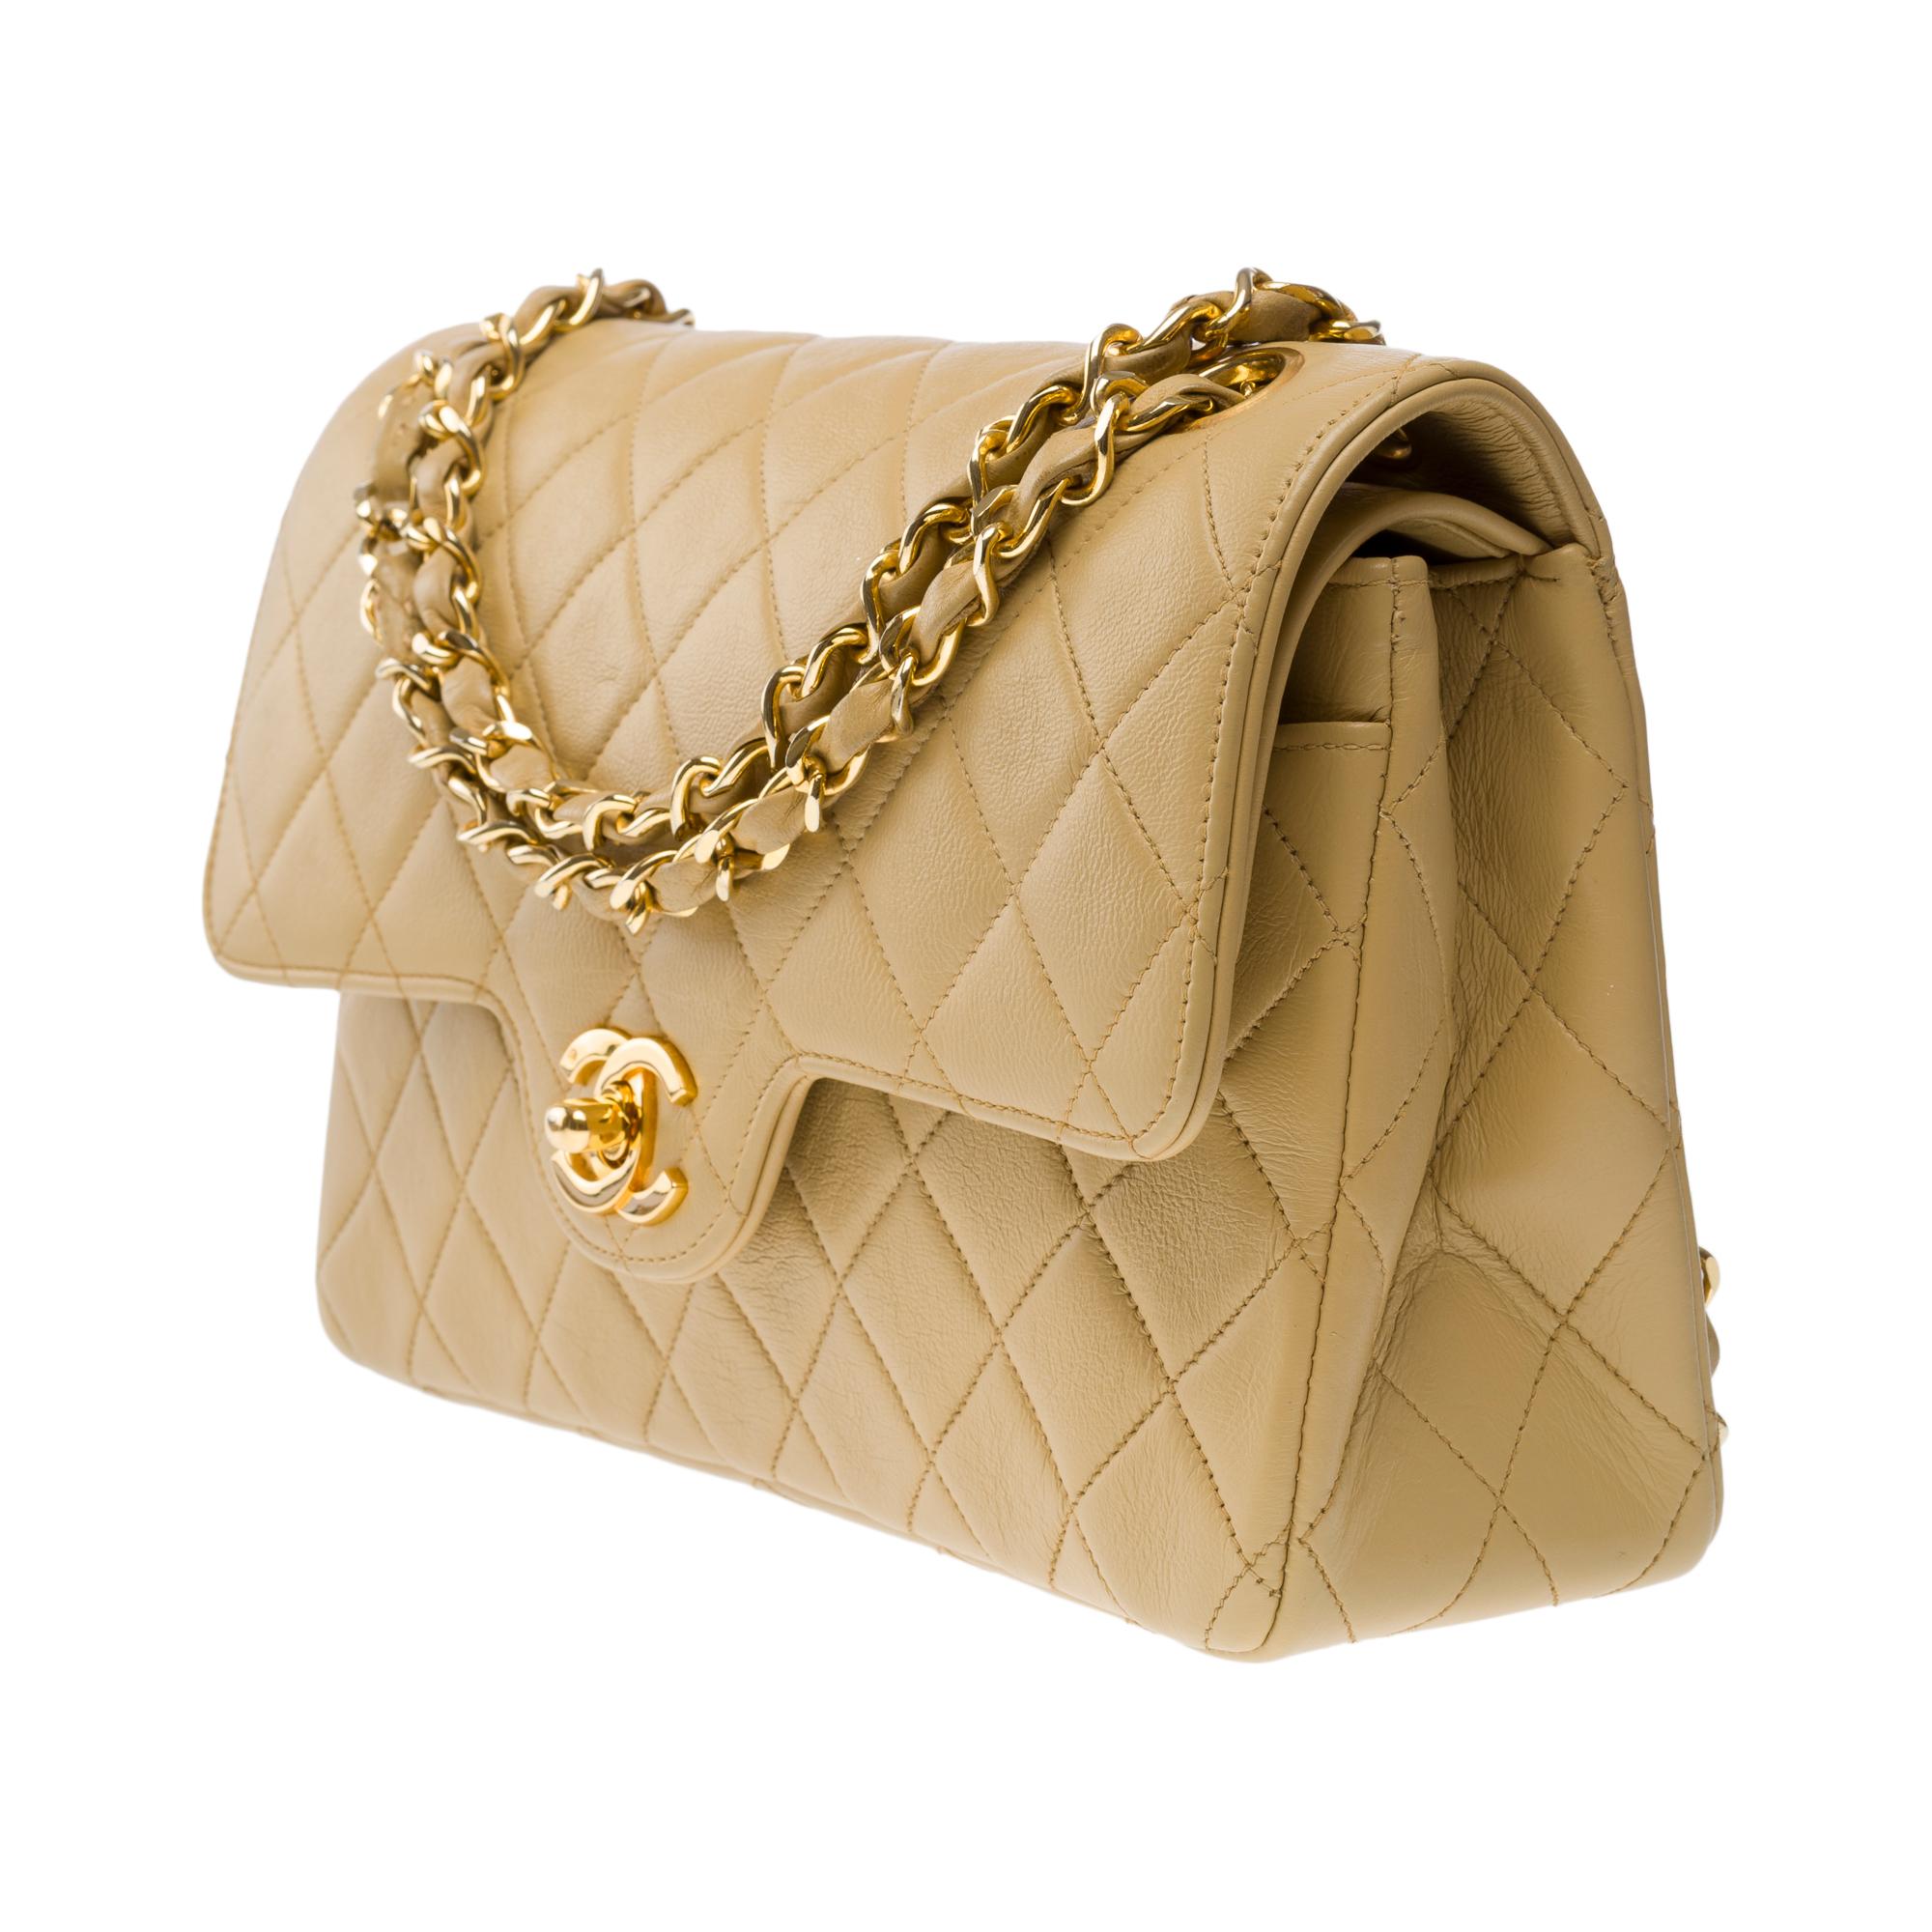 Women's Chanel Timeless 23cm double flap shoulder bag in beige quilted lambskin, GHW For Sale